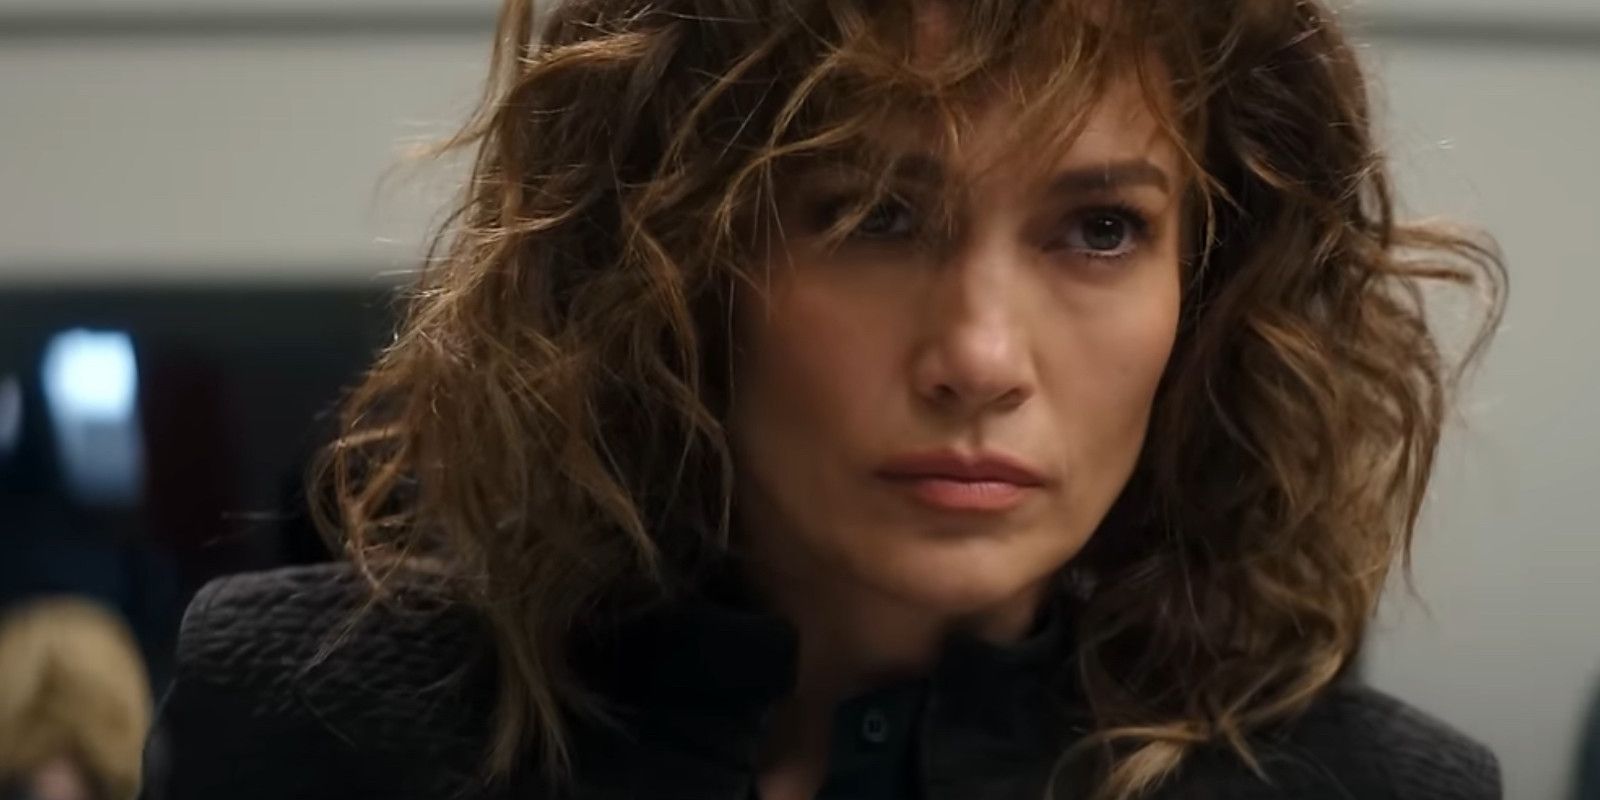 Atlas Jennifer Lopez main character looking concerned and serious in a close up